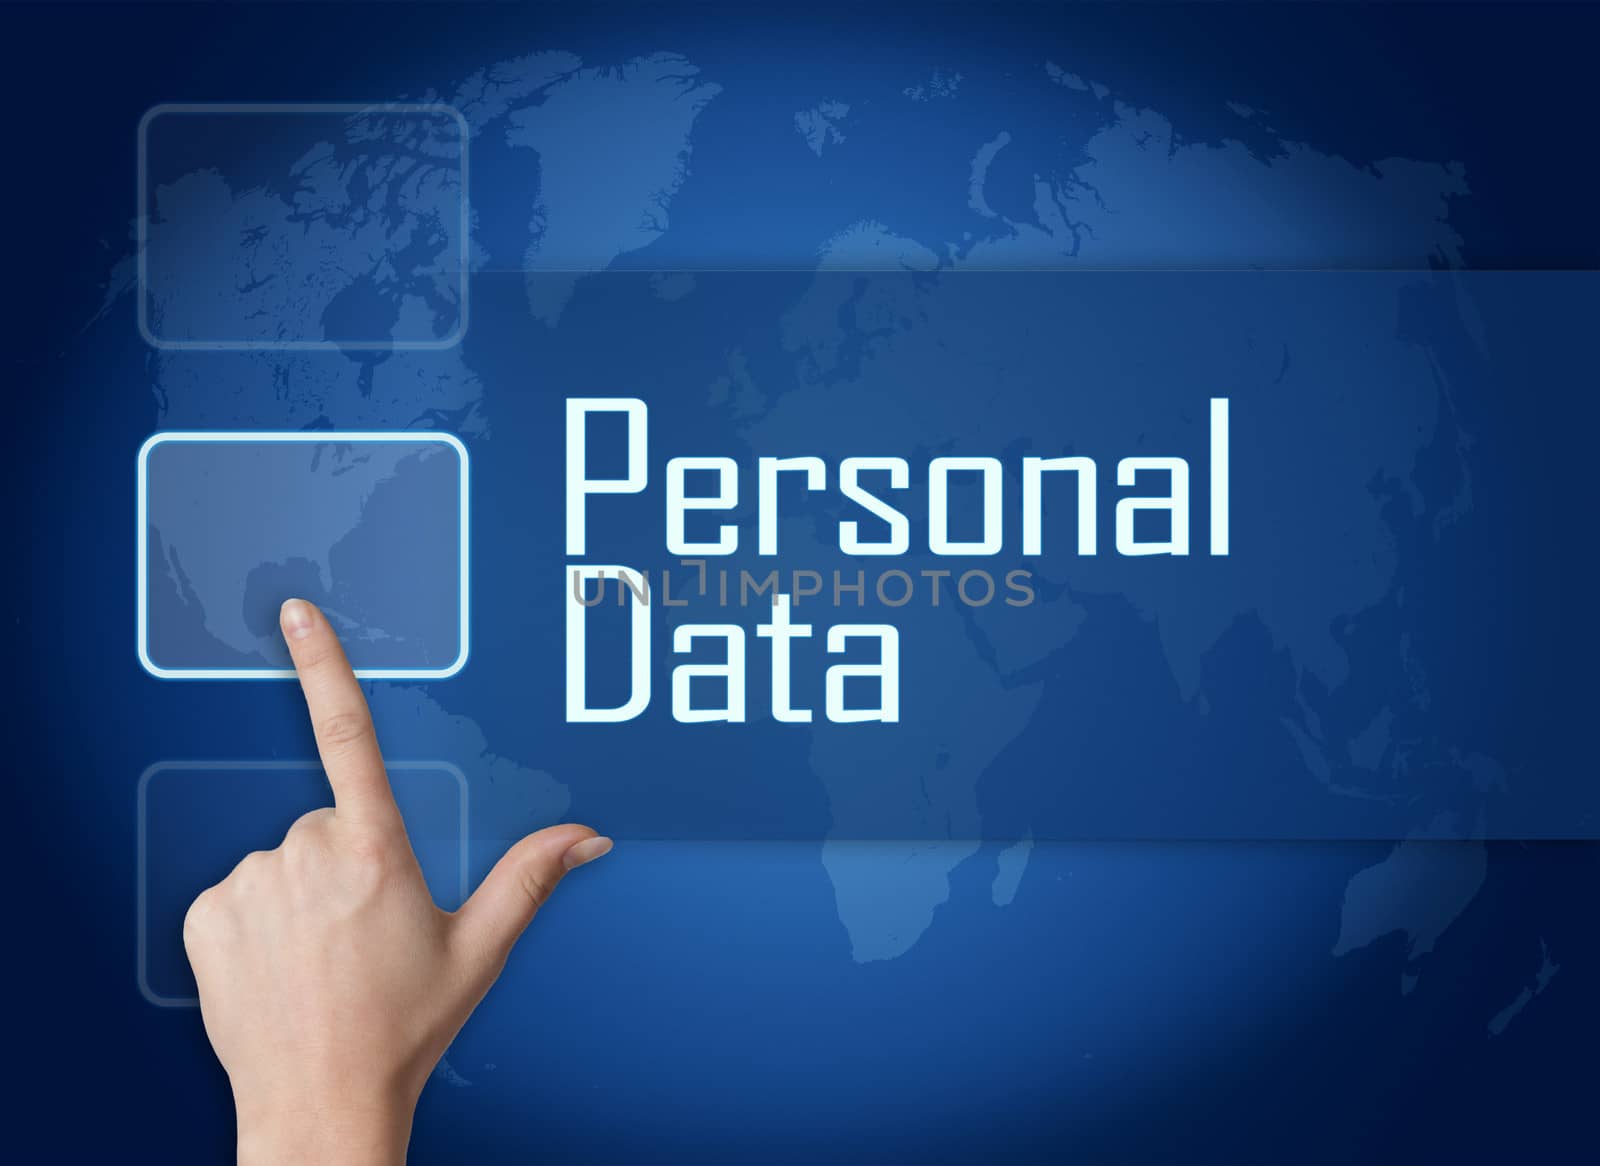 Personal Data concept with interface and world map on blue background